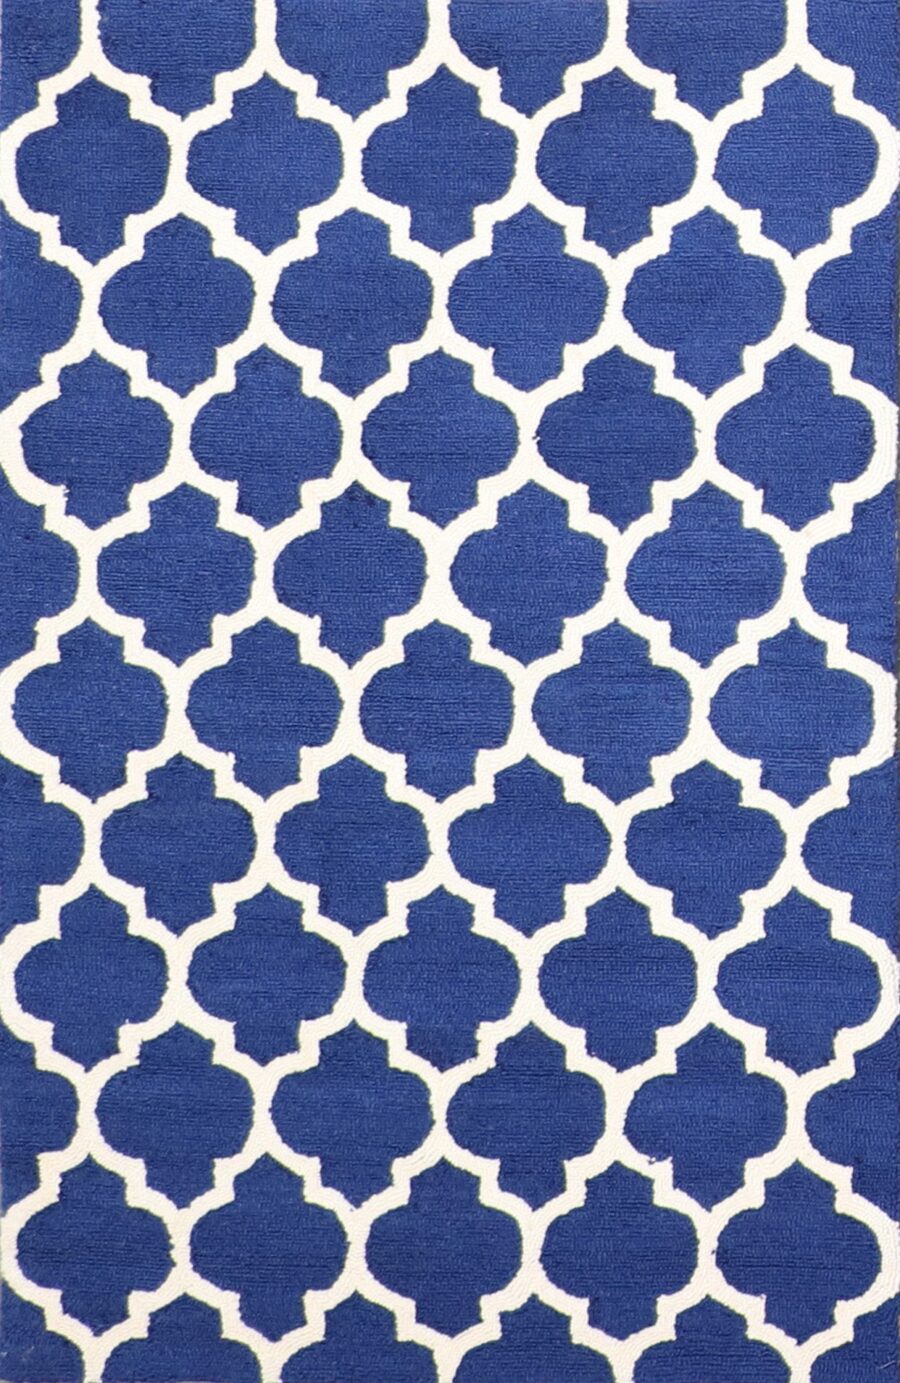 3’7”x5’5” Contemporary Blue Wool Hand-Tufted Rug - Direct Rug Import | Rugs in Chicago, Indiana,South Bend,Granger